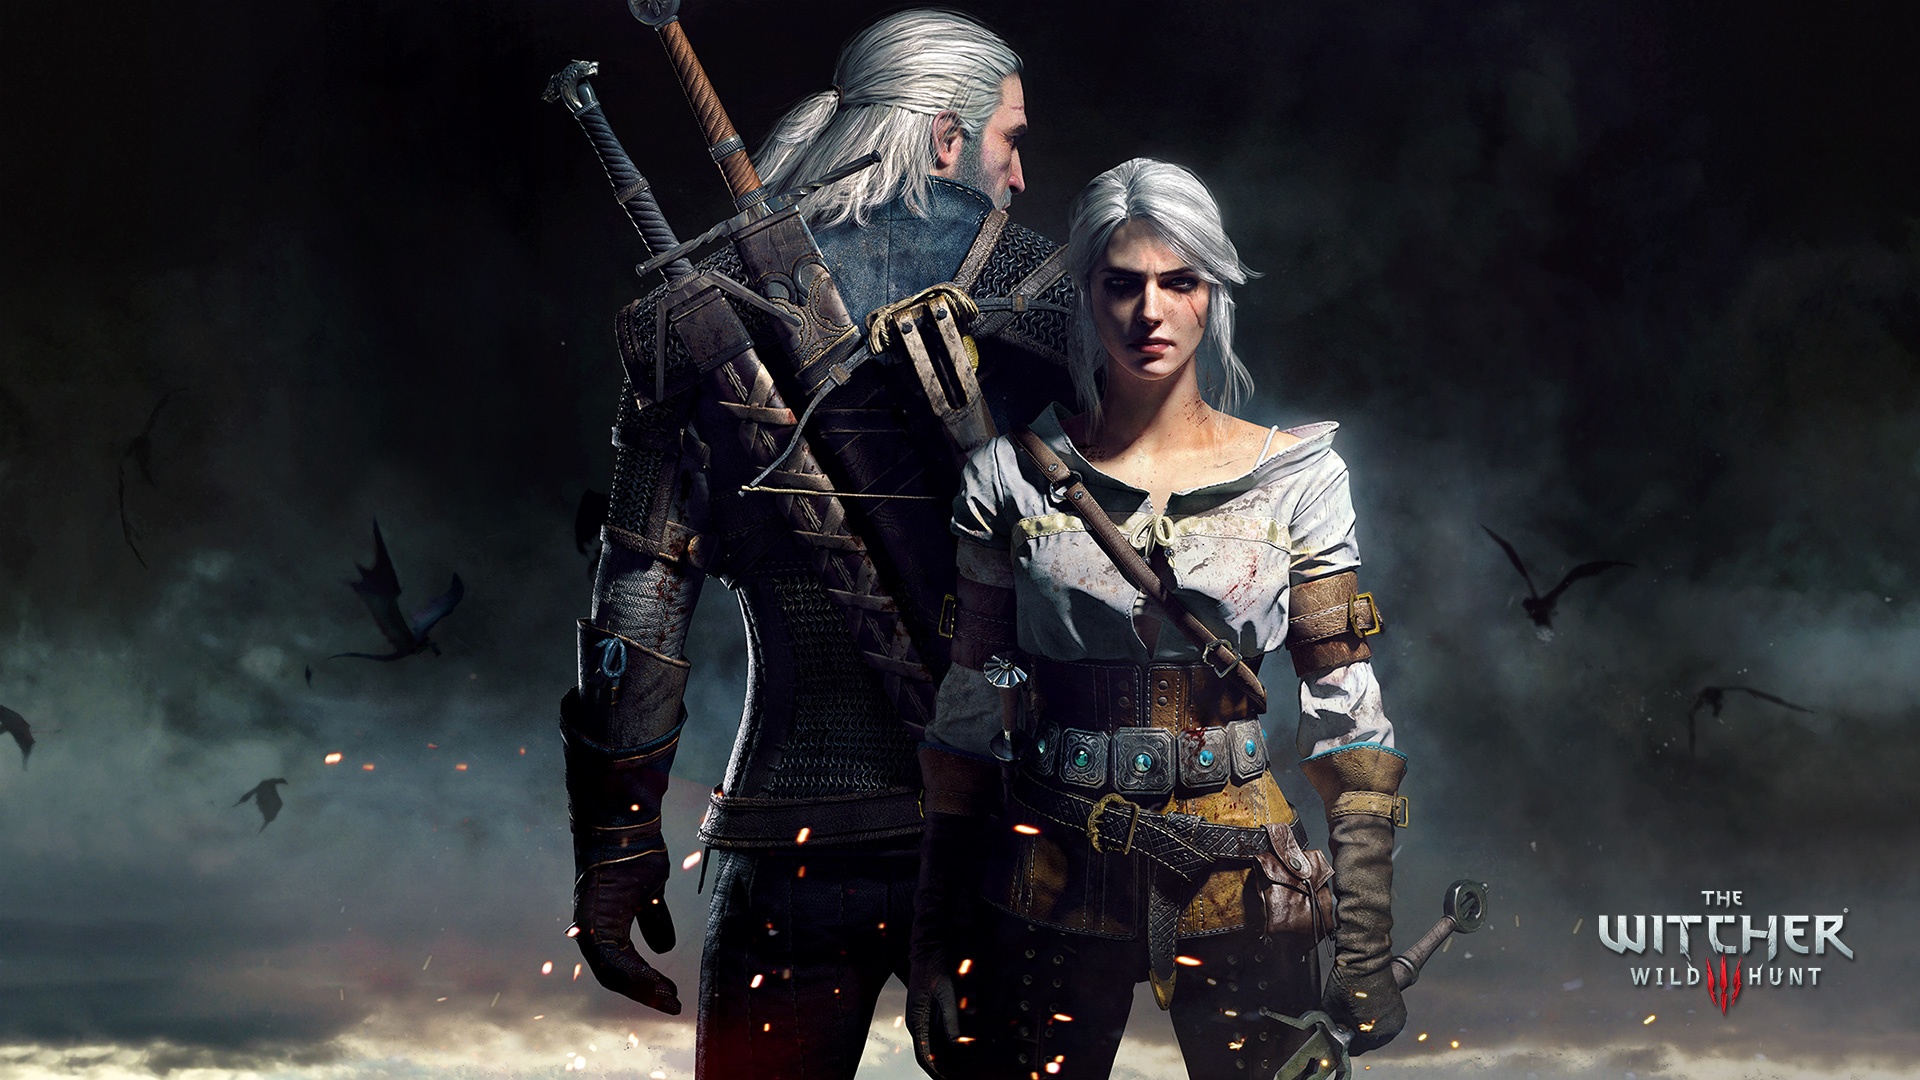 LTTP Review: The Witcher 3: Wild Hunt